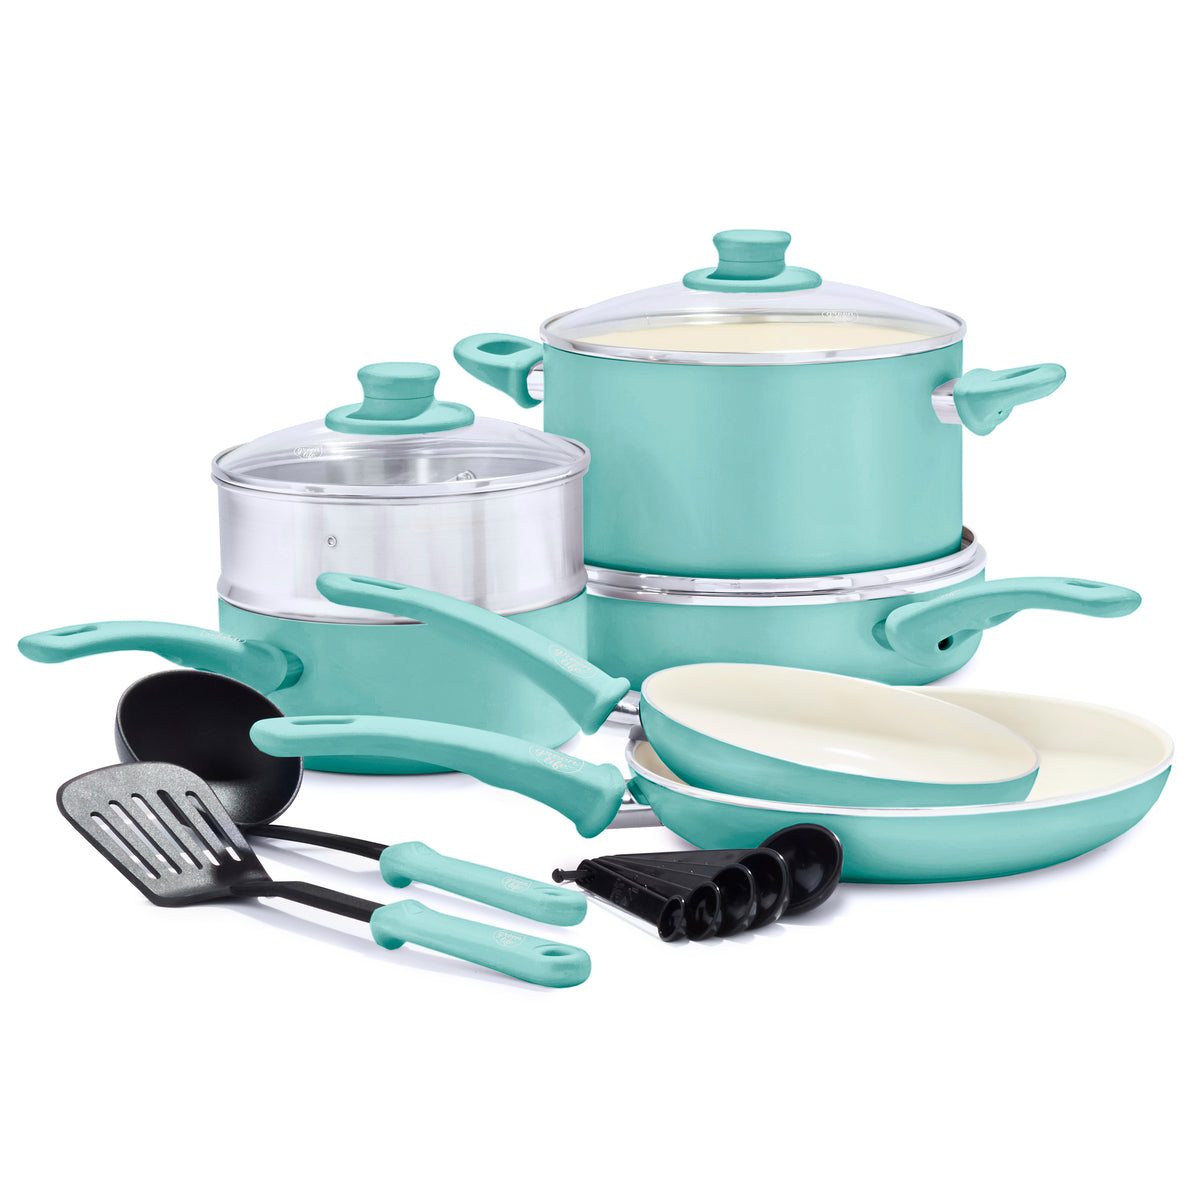 GreenLife Soft Grip Healthy Ceramic Nonstick 16 Piece Cookware Pots and Pans  Set, PFAS-Free, Dishwasher Safe, Turquoise